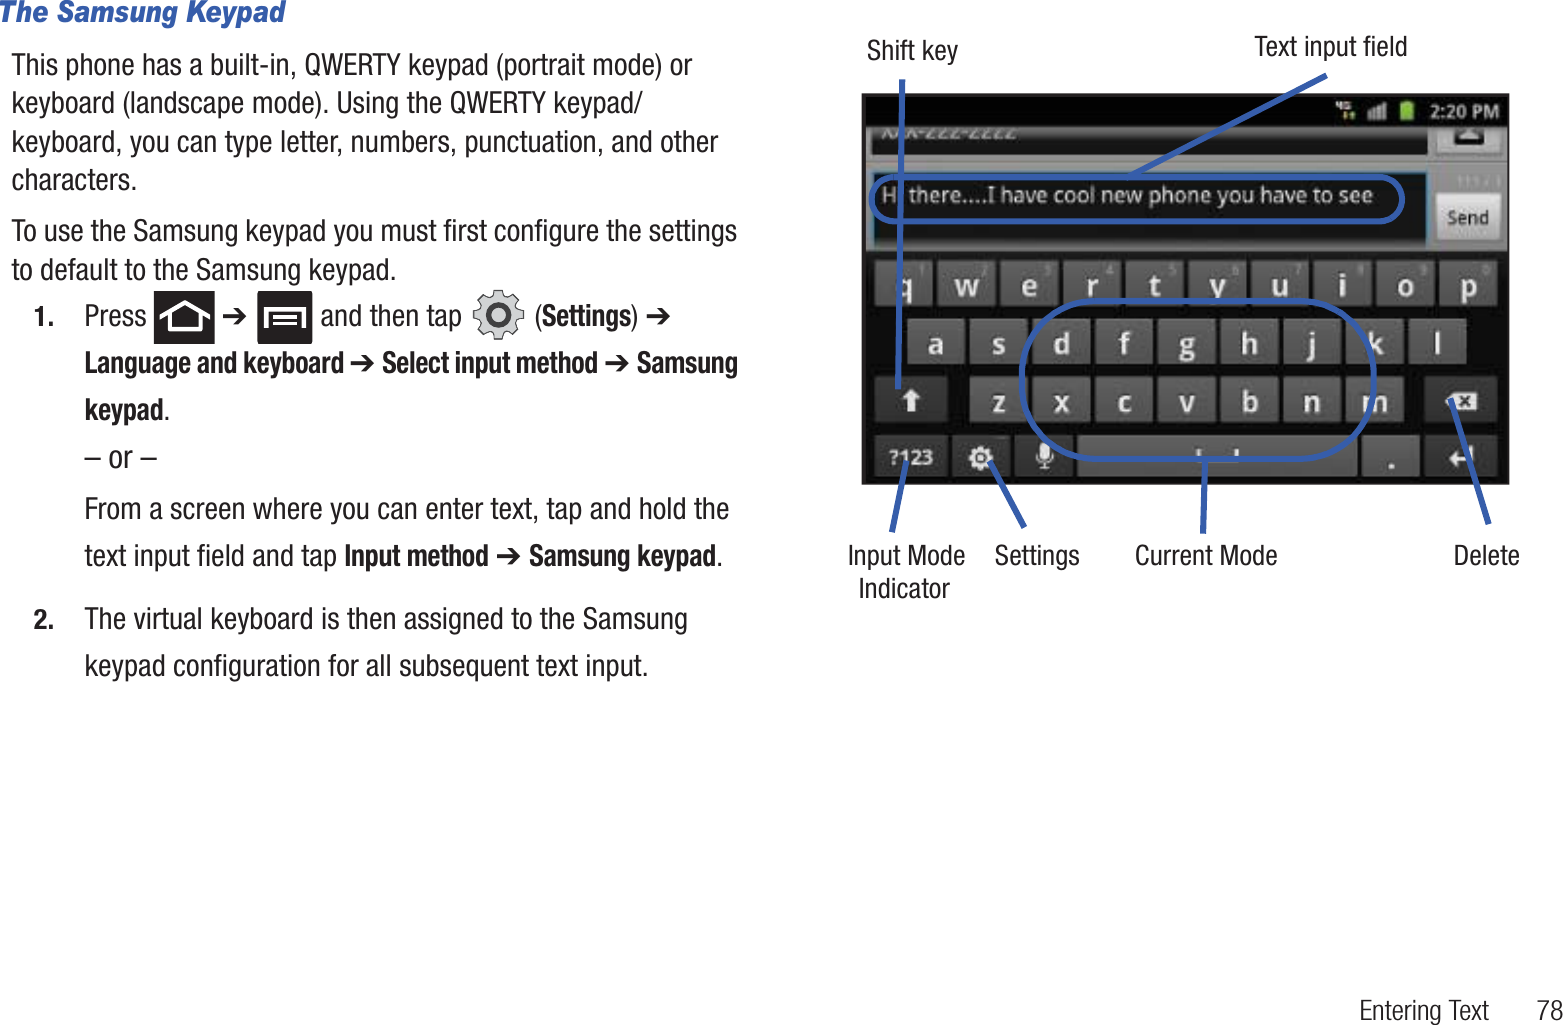 Entering Text       78The Samsung KeypadThis phone has a built-in, QWERTY keypad (portrait mode) or keyboard (landscape mode). Using the QWERTY keypad/ keyboard, you can type letter, numbers, punctuation, and other characters.To use the Samsung keypad you must first configure the settings to default to the Samsung keypad.1. Press  ➔   and then tap   (Settings) ➔ Language and keyboard ➔ Select input method ➔ Samsung keypad.– or –From a screen where you can enter text, tap and hold the text input field and tap Input method ➔ Samsung keypad.2. The virtual keyboard is then assigned to the Samsung keypad configuration for all subsequent text input. Text input fieldShift keyInput Mode Settings DeleteCurrent ModeIndicator